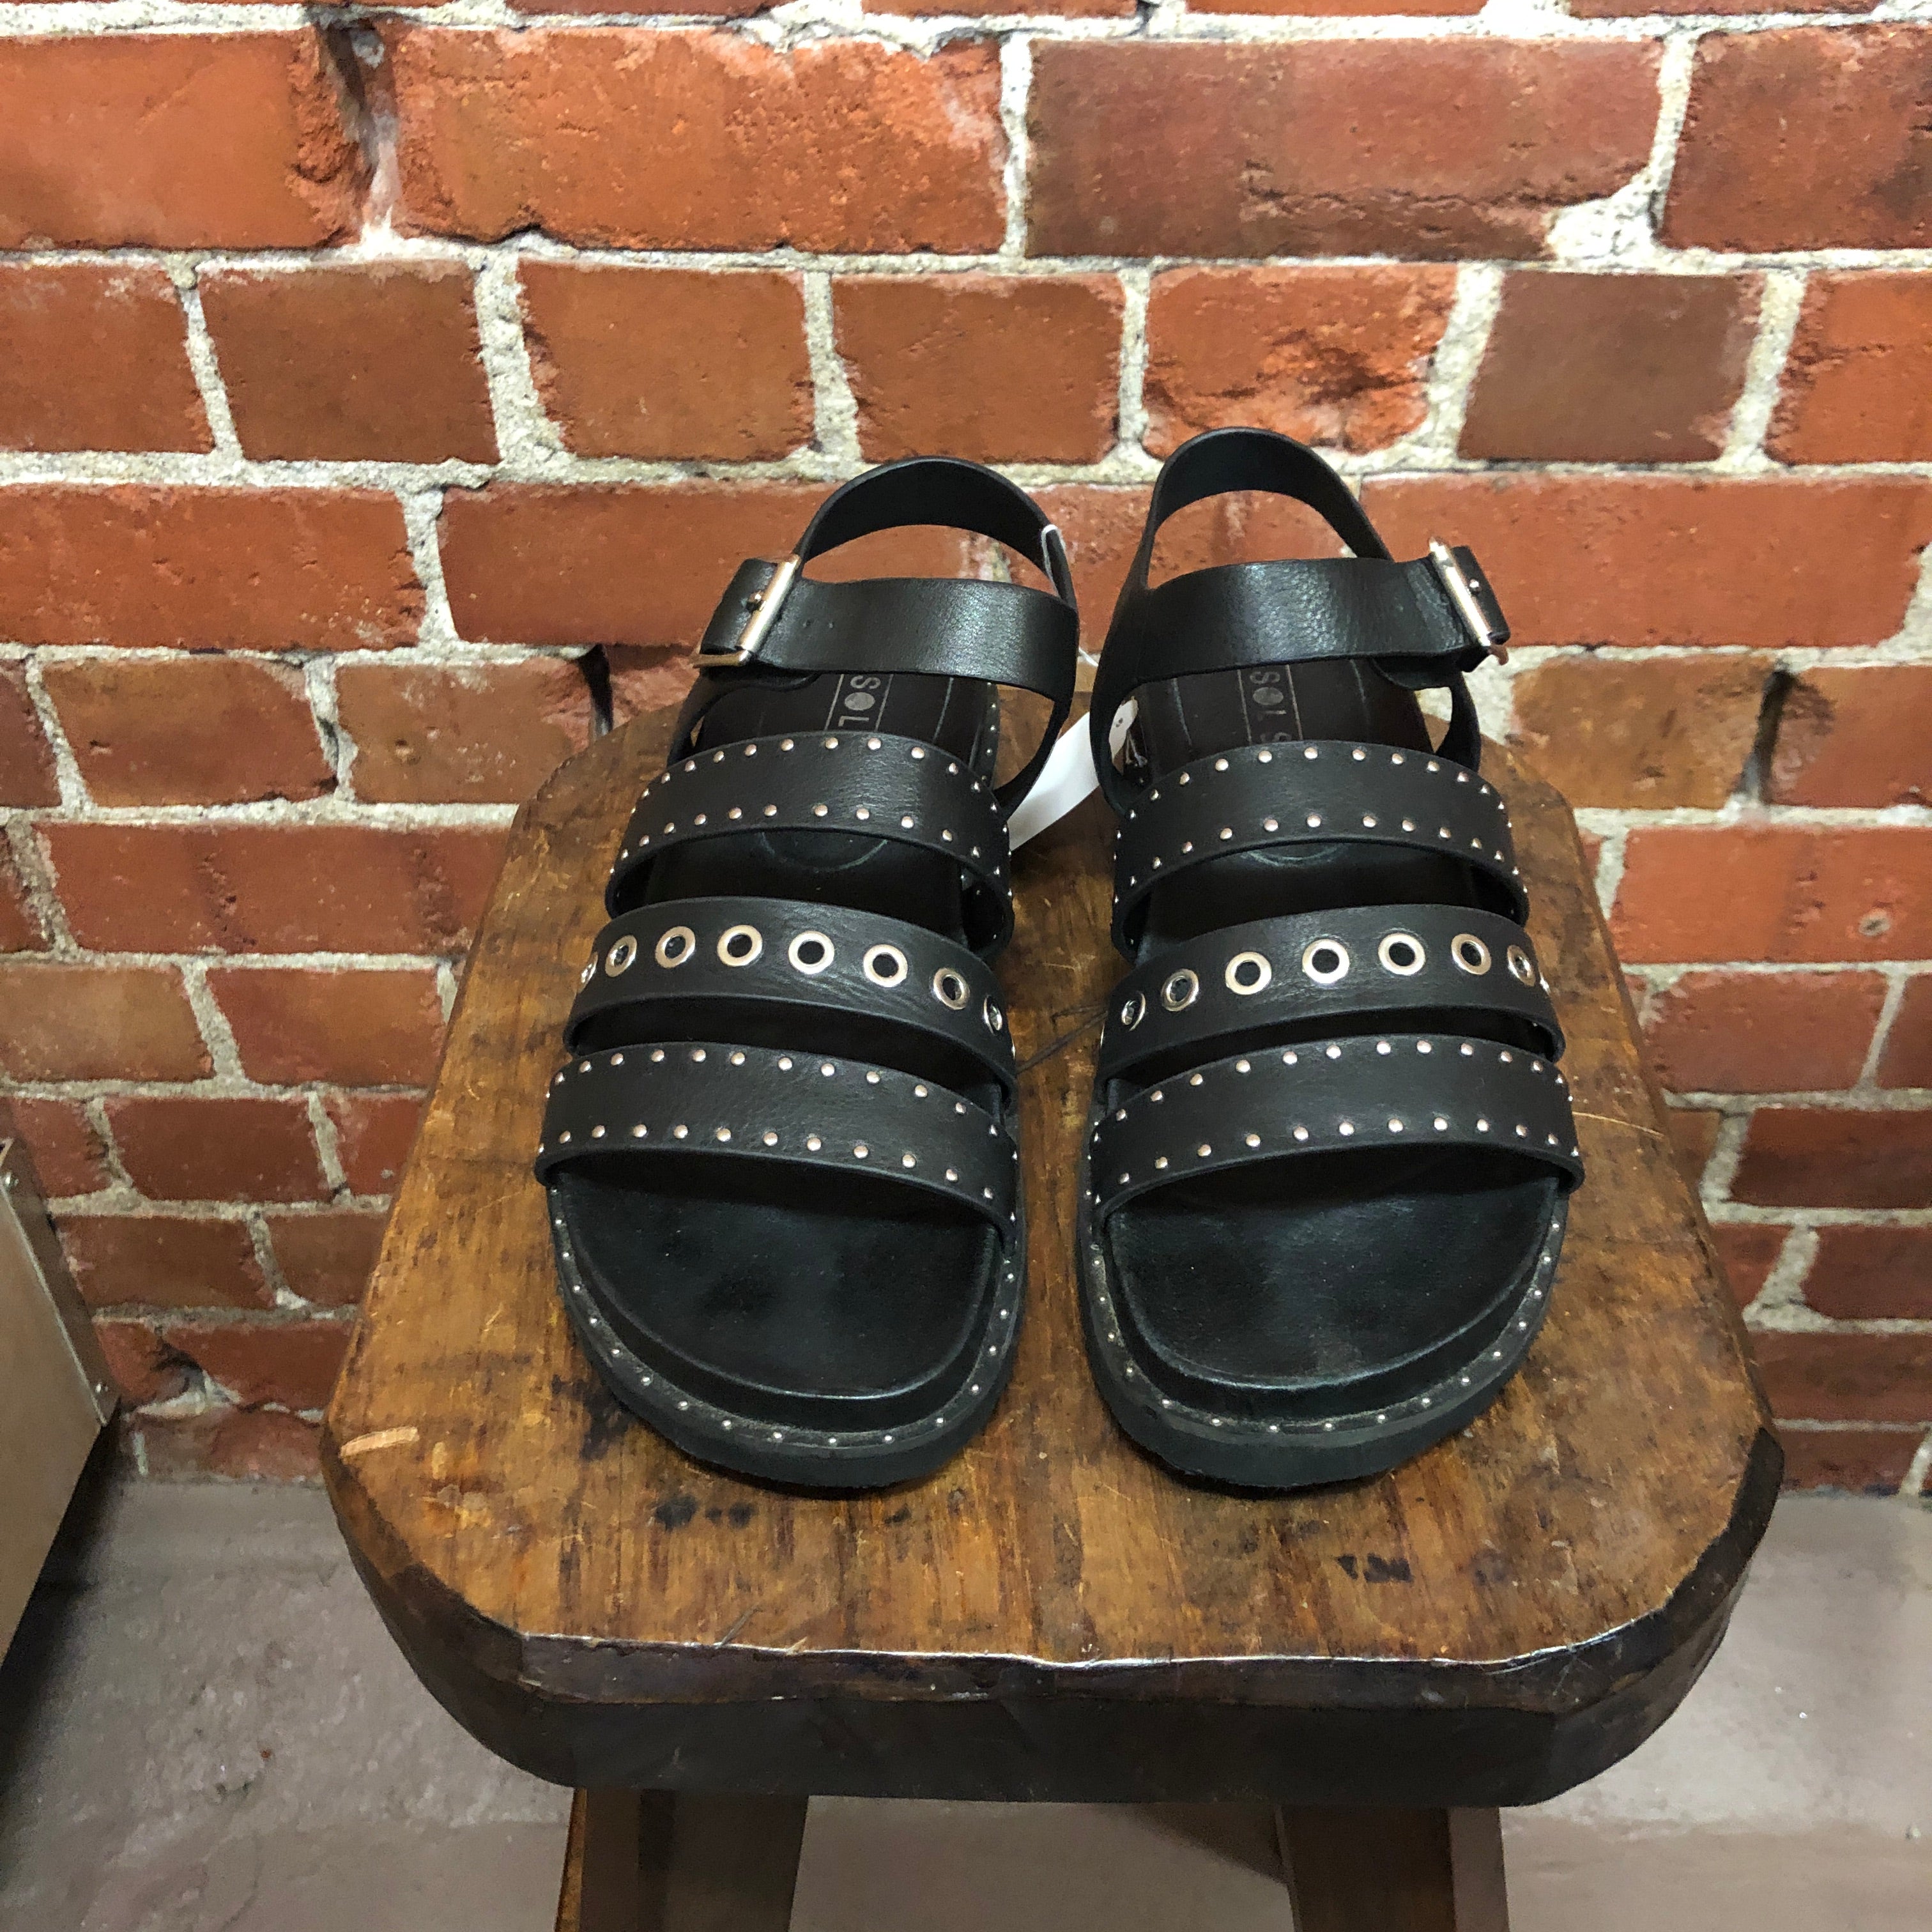 Leather studded sandals AS NEW 40